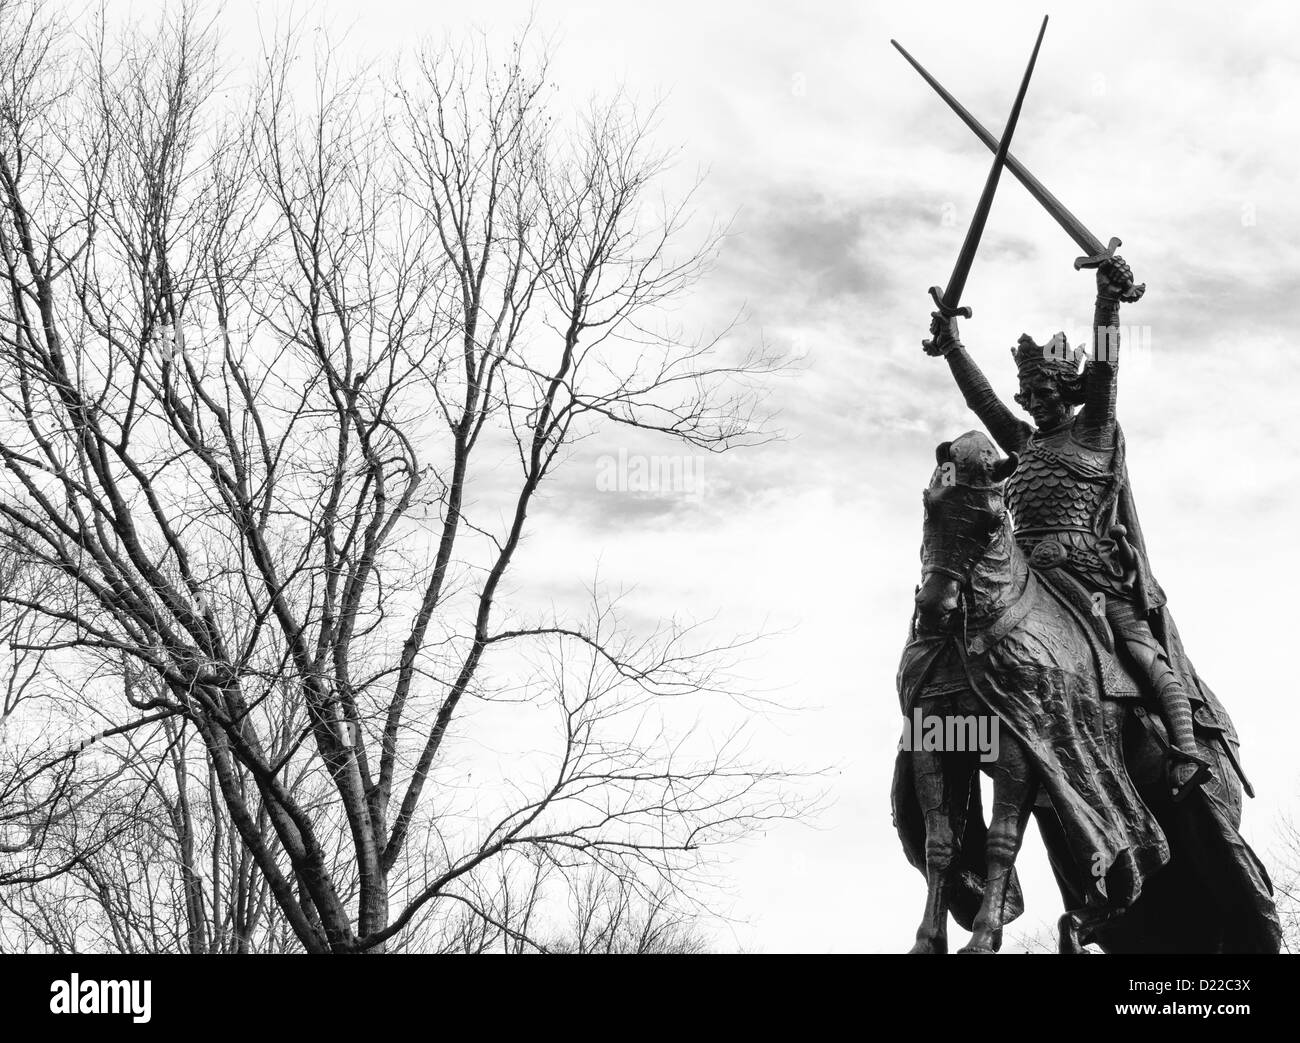 King Jagiello Monument in Central Park, Manhattan--In Black and White. Stock Photo